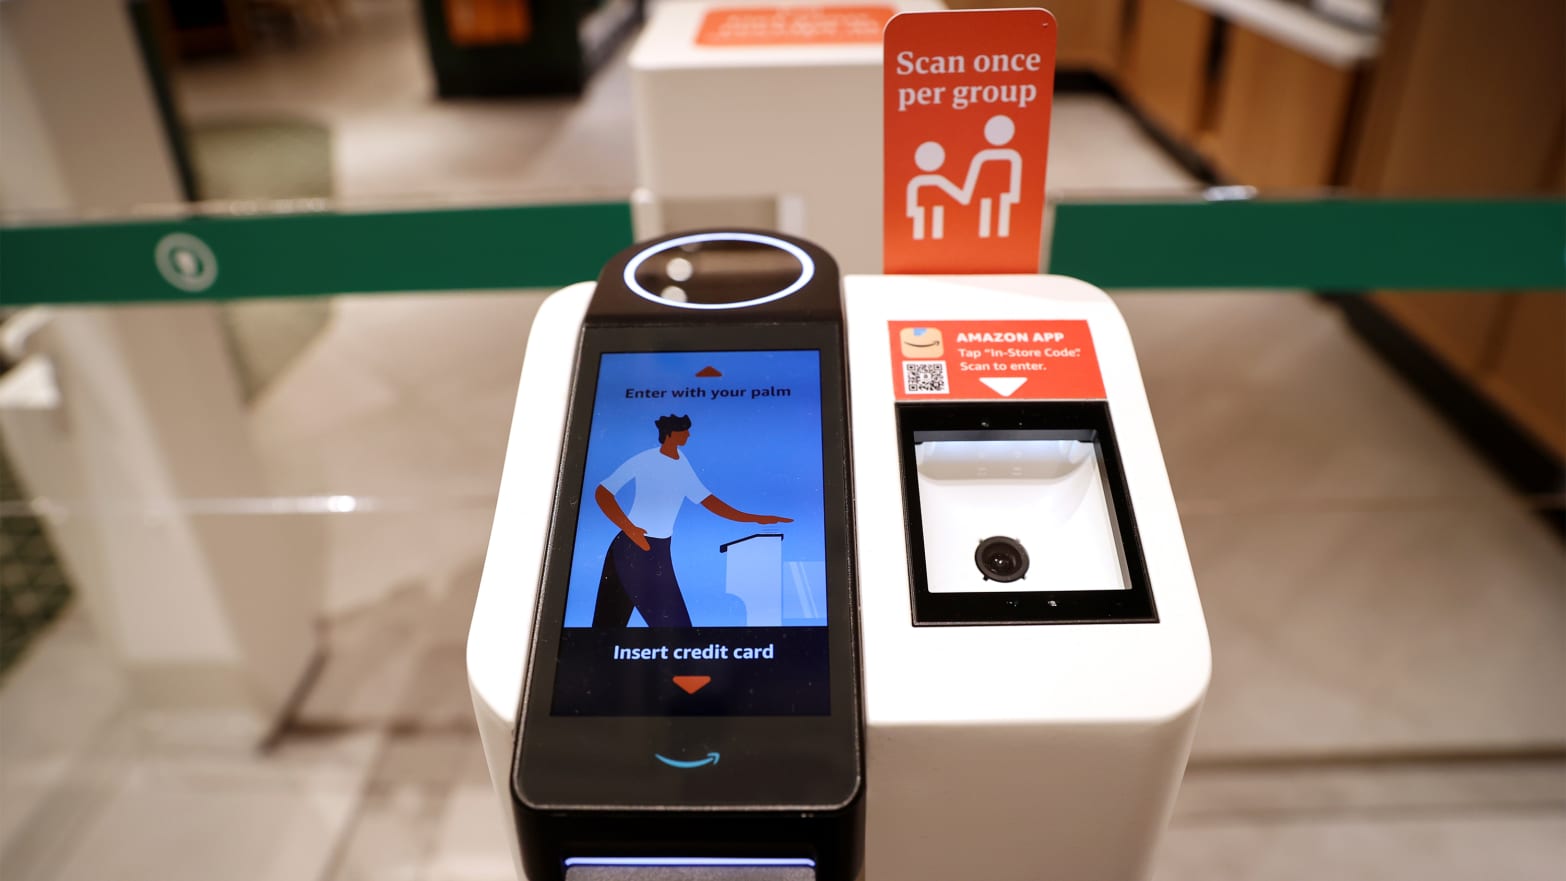 s 'Just Walk Out' Frictionless Checkout Tech Is a Privacy